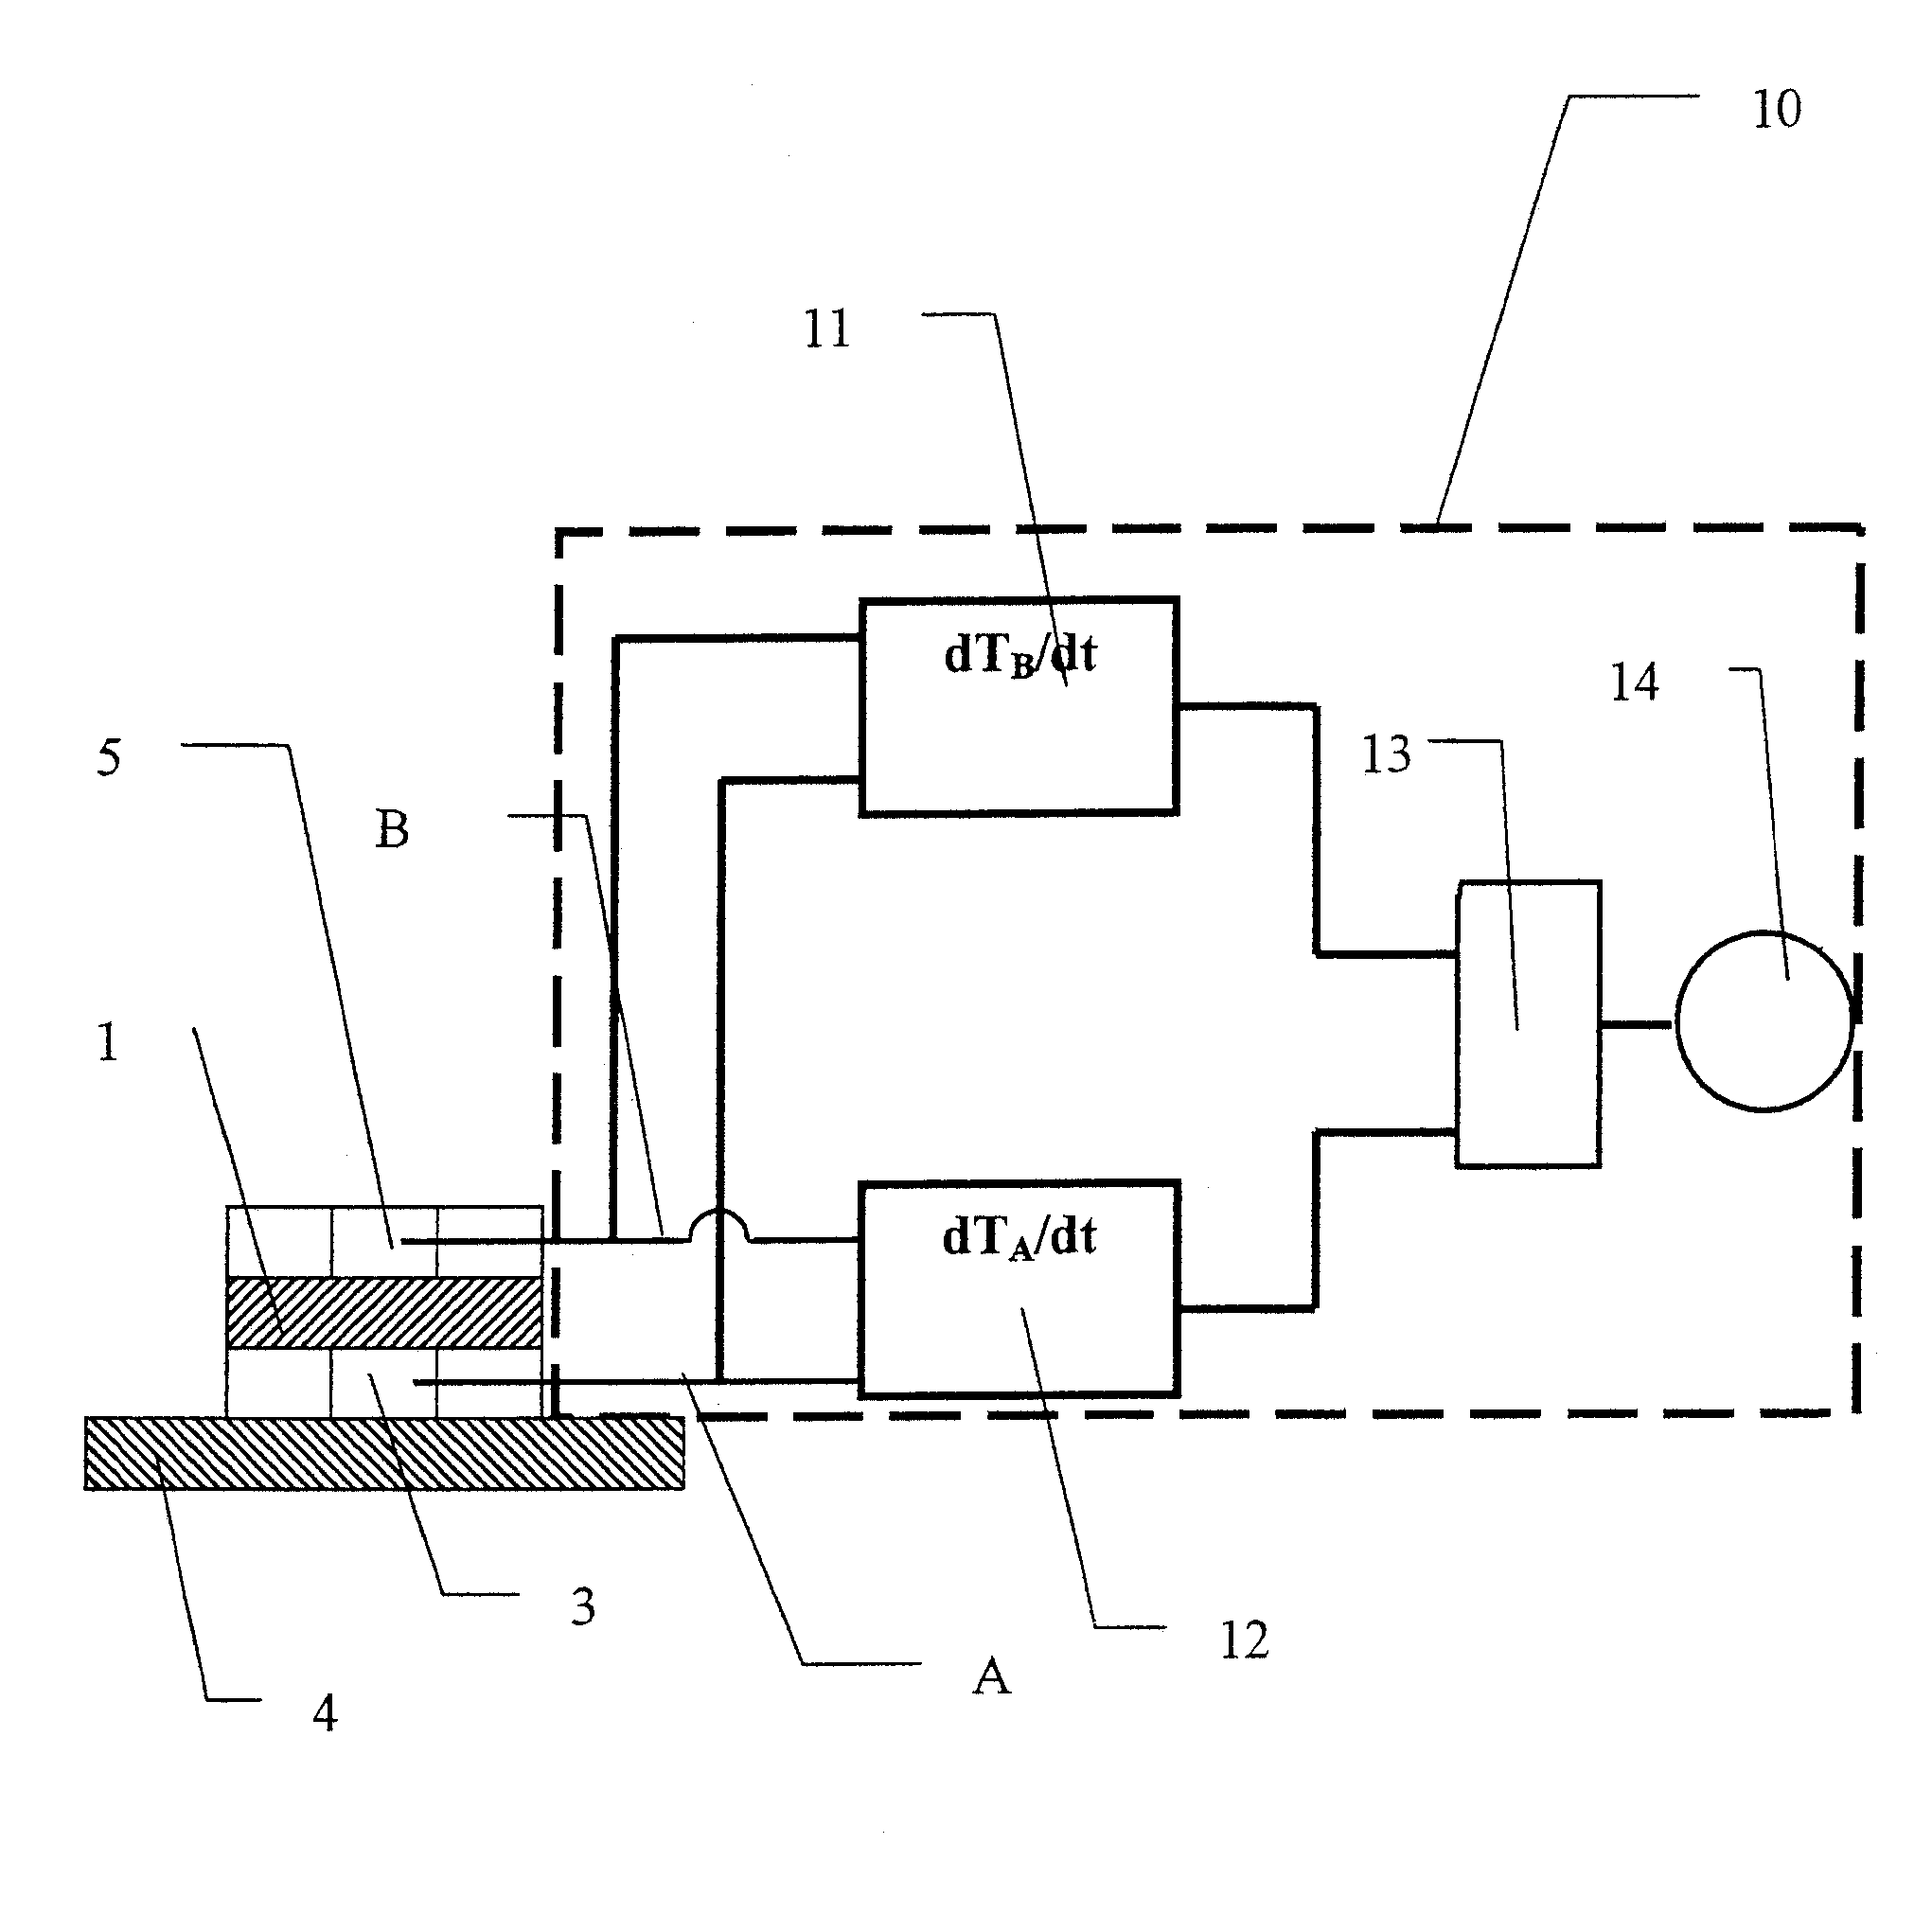 Temperature-measuring device with function indicator